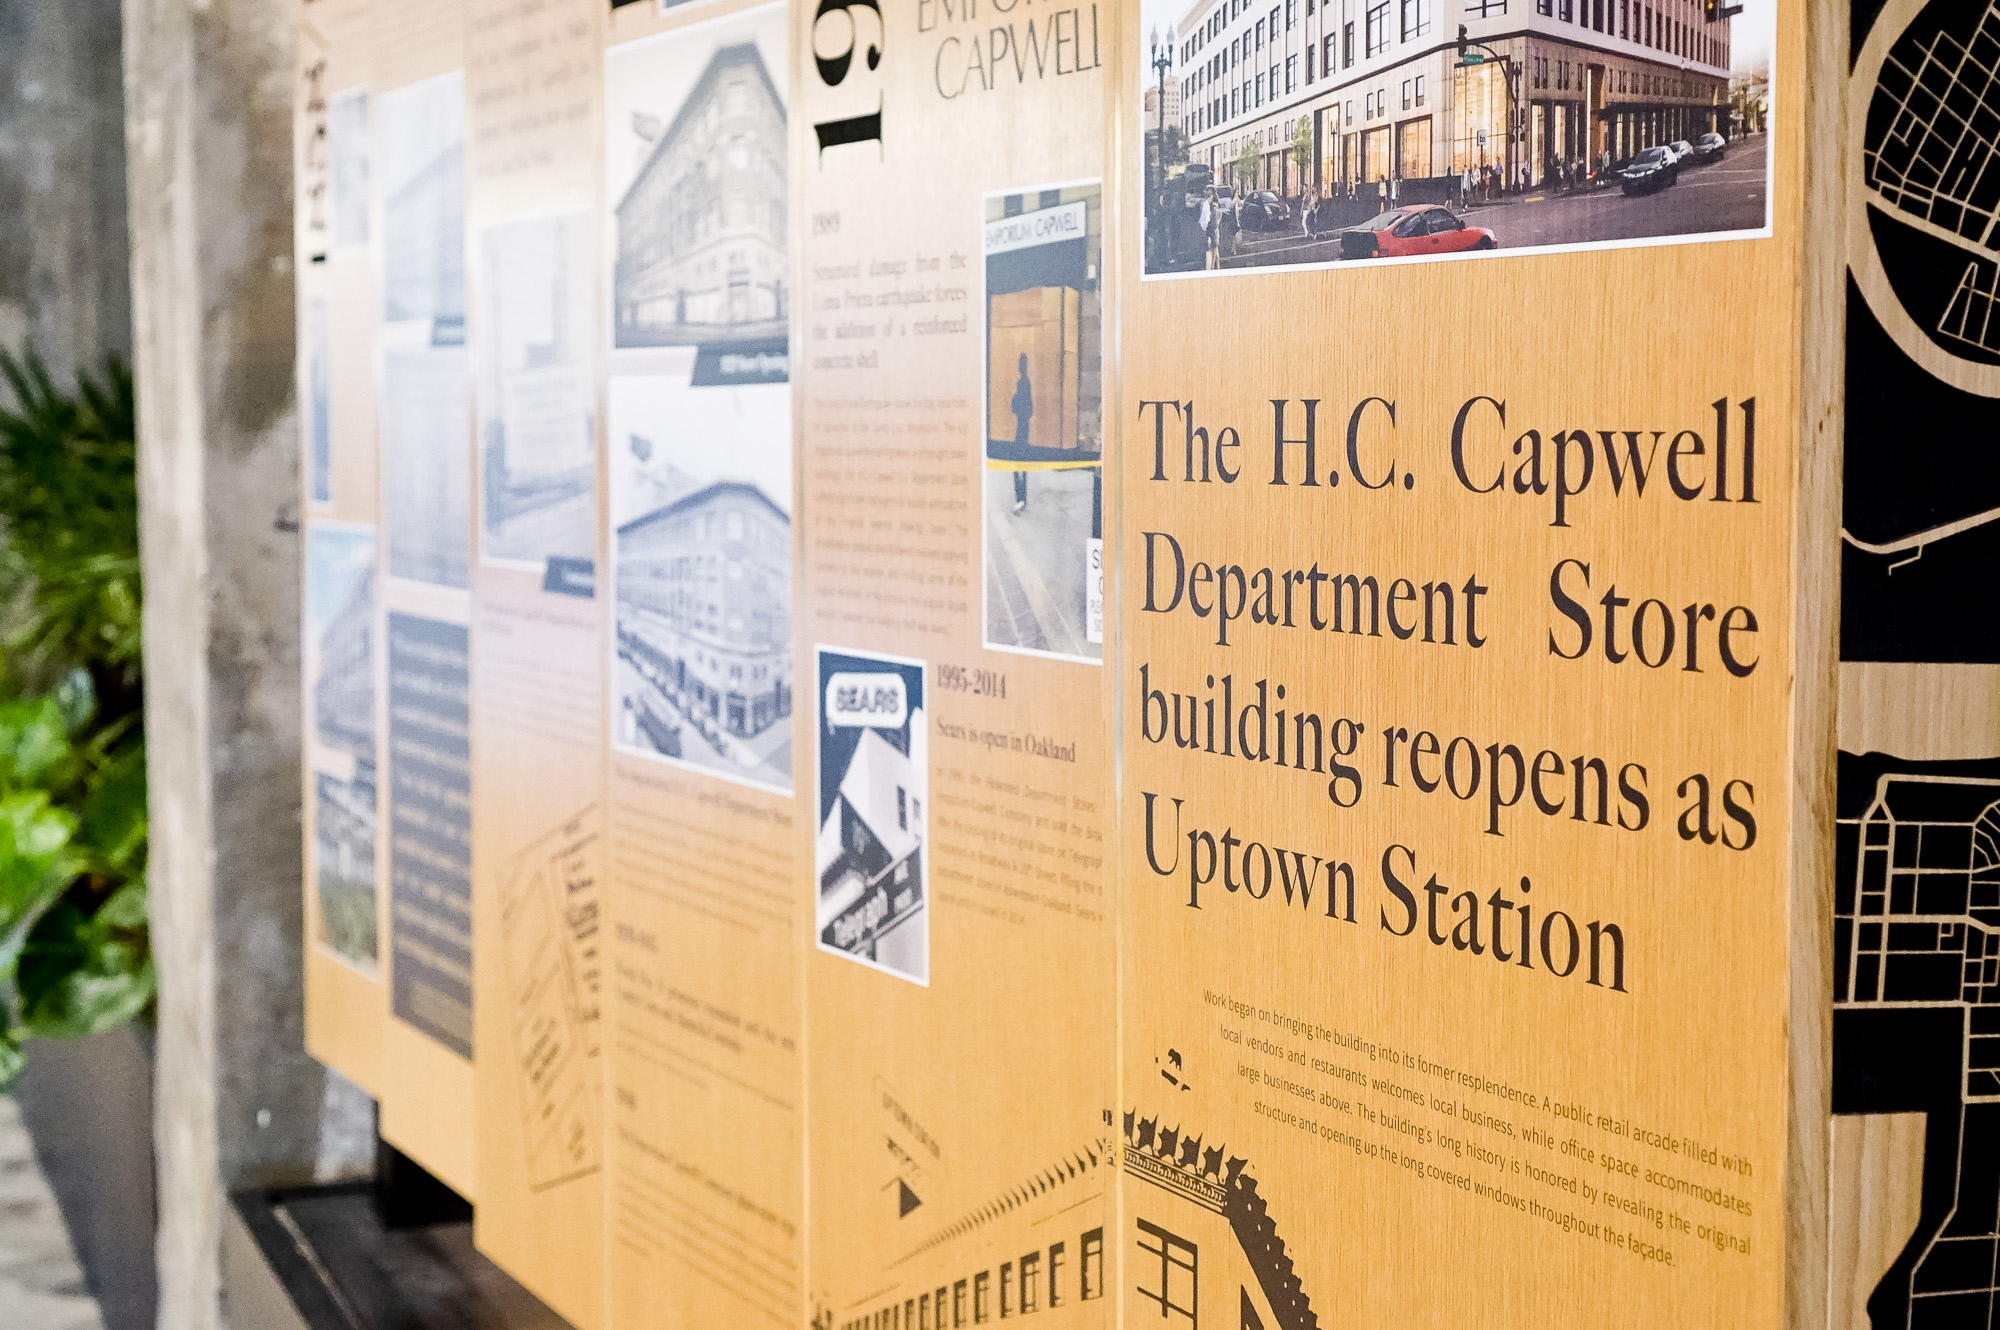 Wood/mixed media dimensional timeline display in the lobby of Uptown Station, an office and retail complex in a restored historic building located in downtown Oakland.